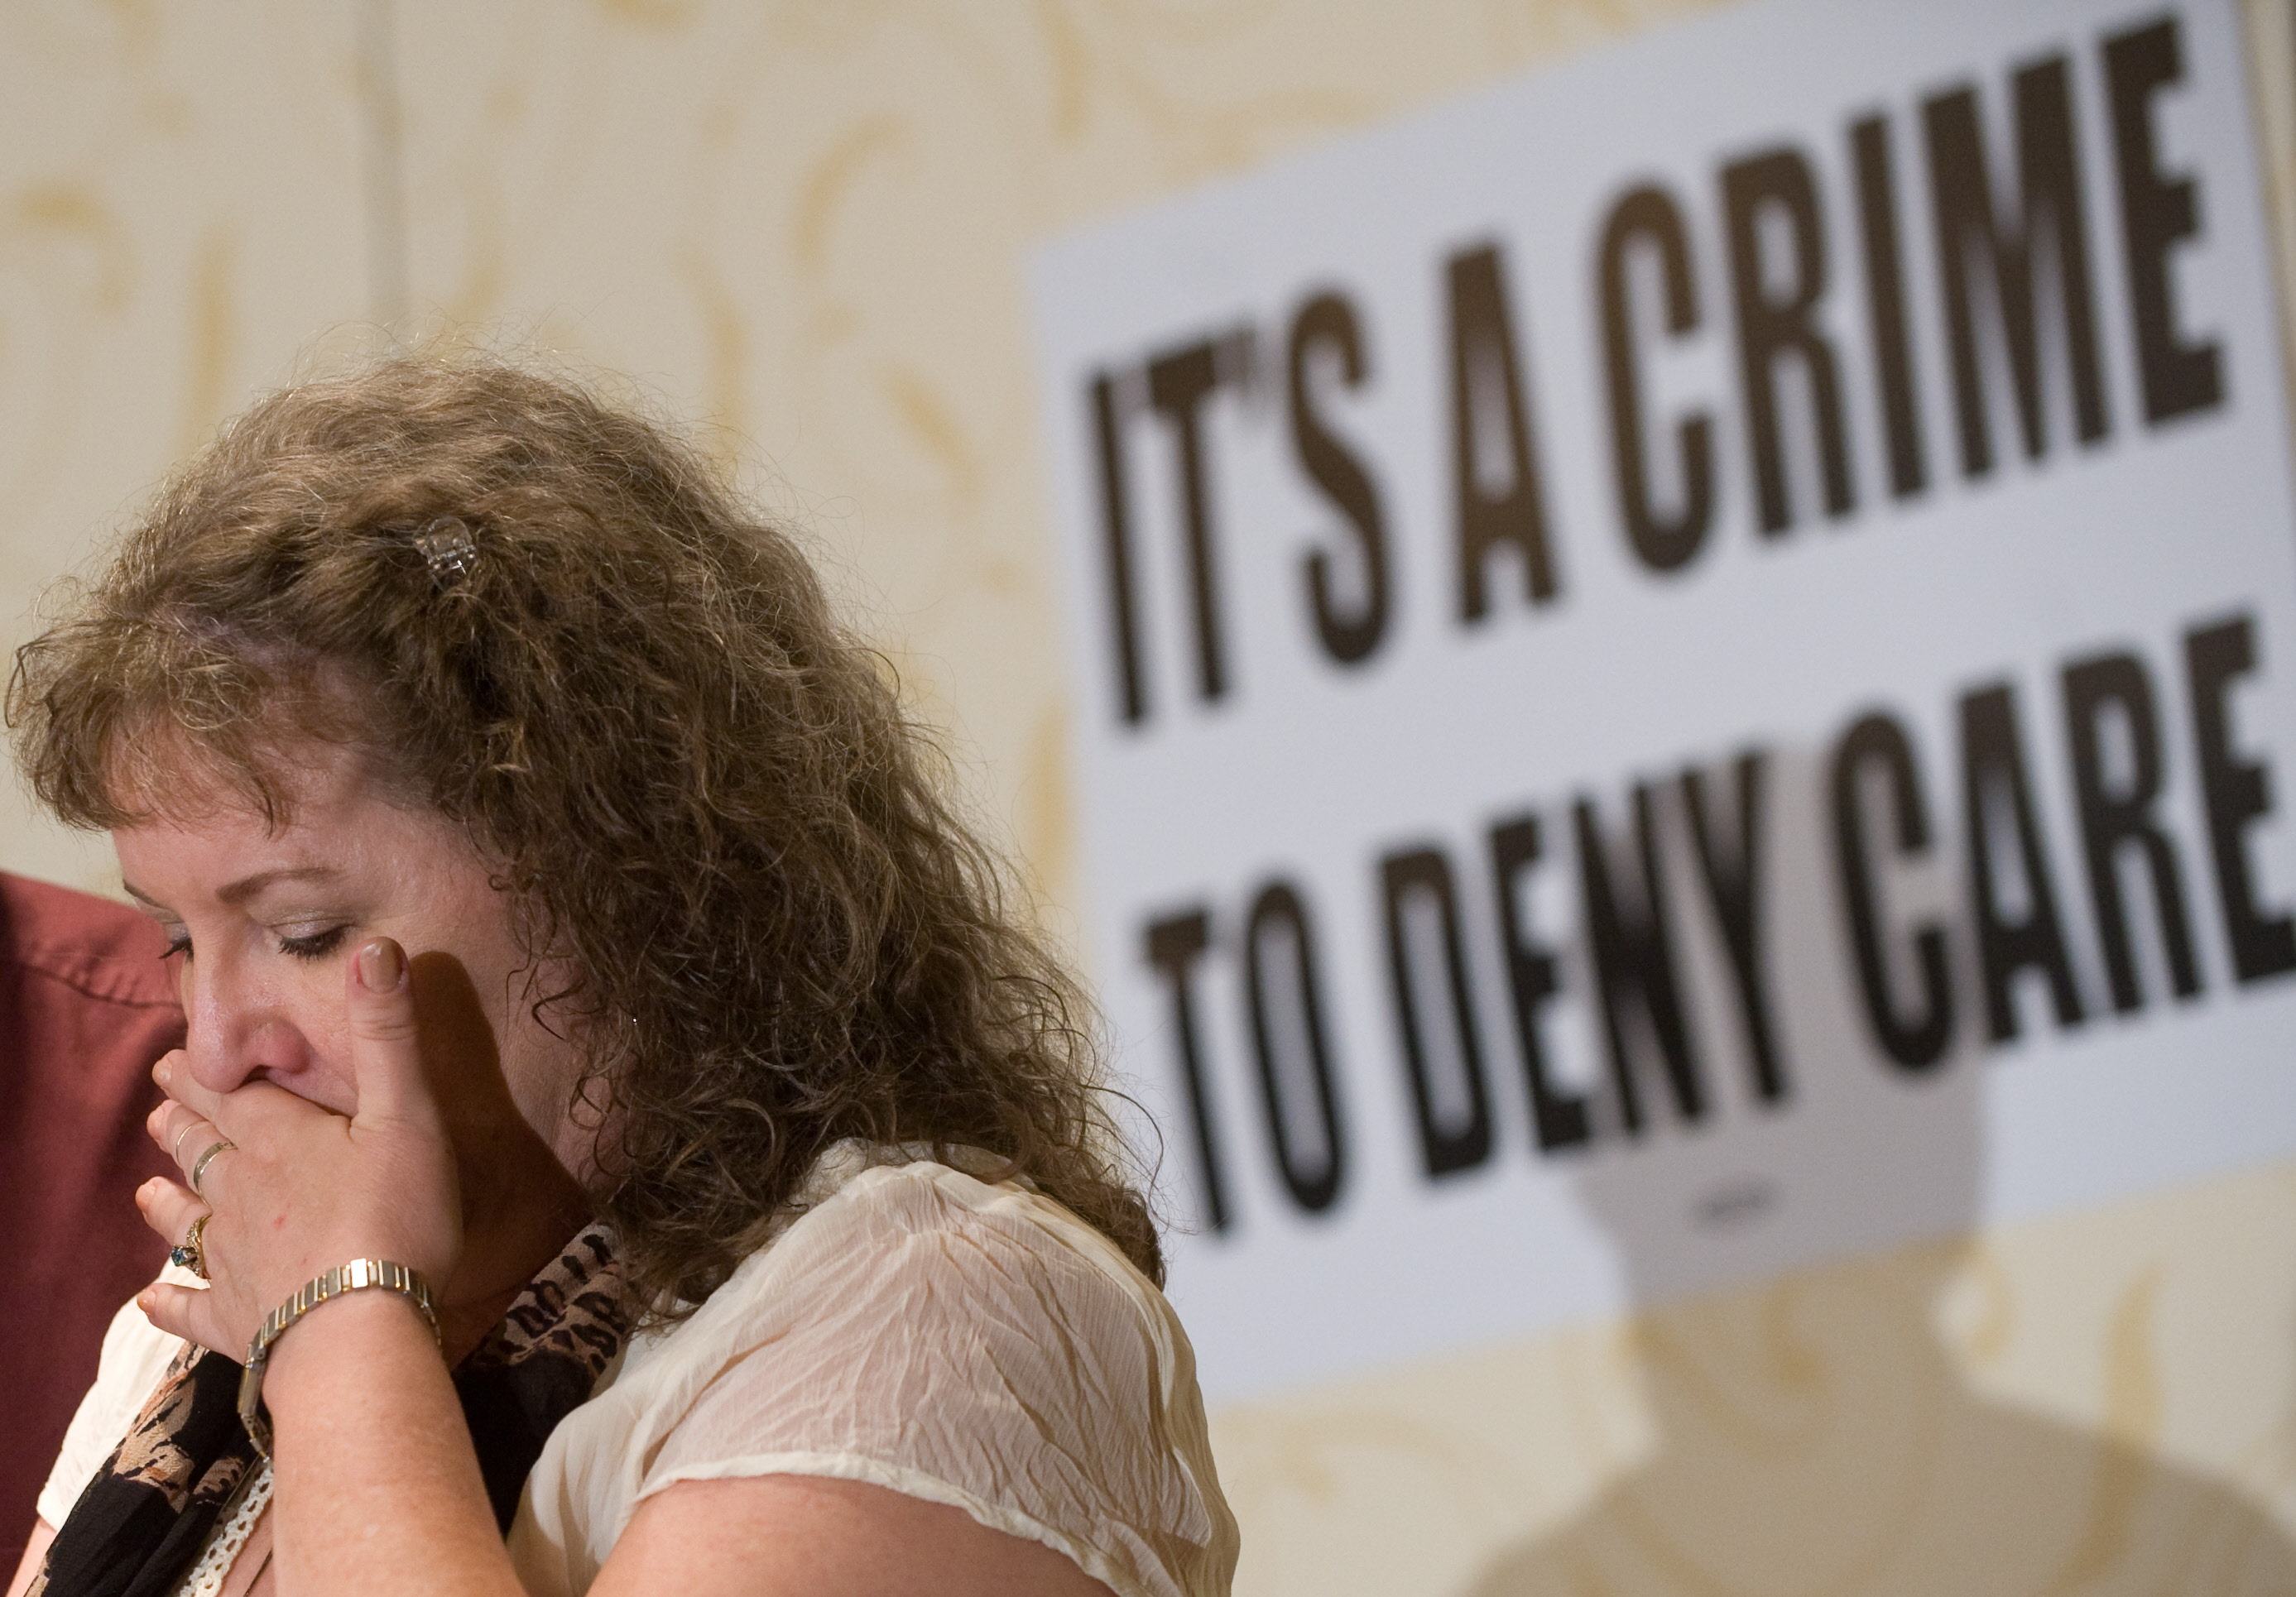 Kelly Arellanes of Little Rock, Arkansas, cries in front of a sign that says "it's a crime to deny care"